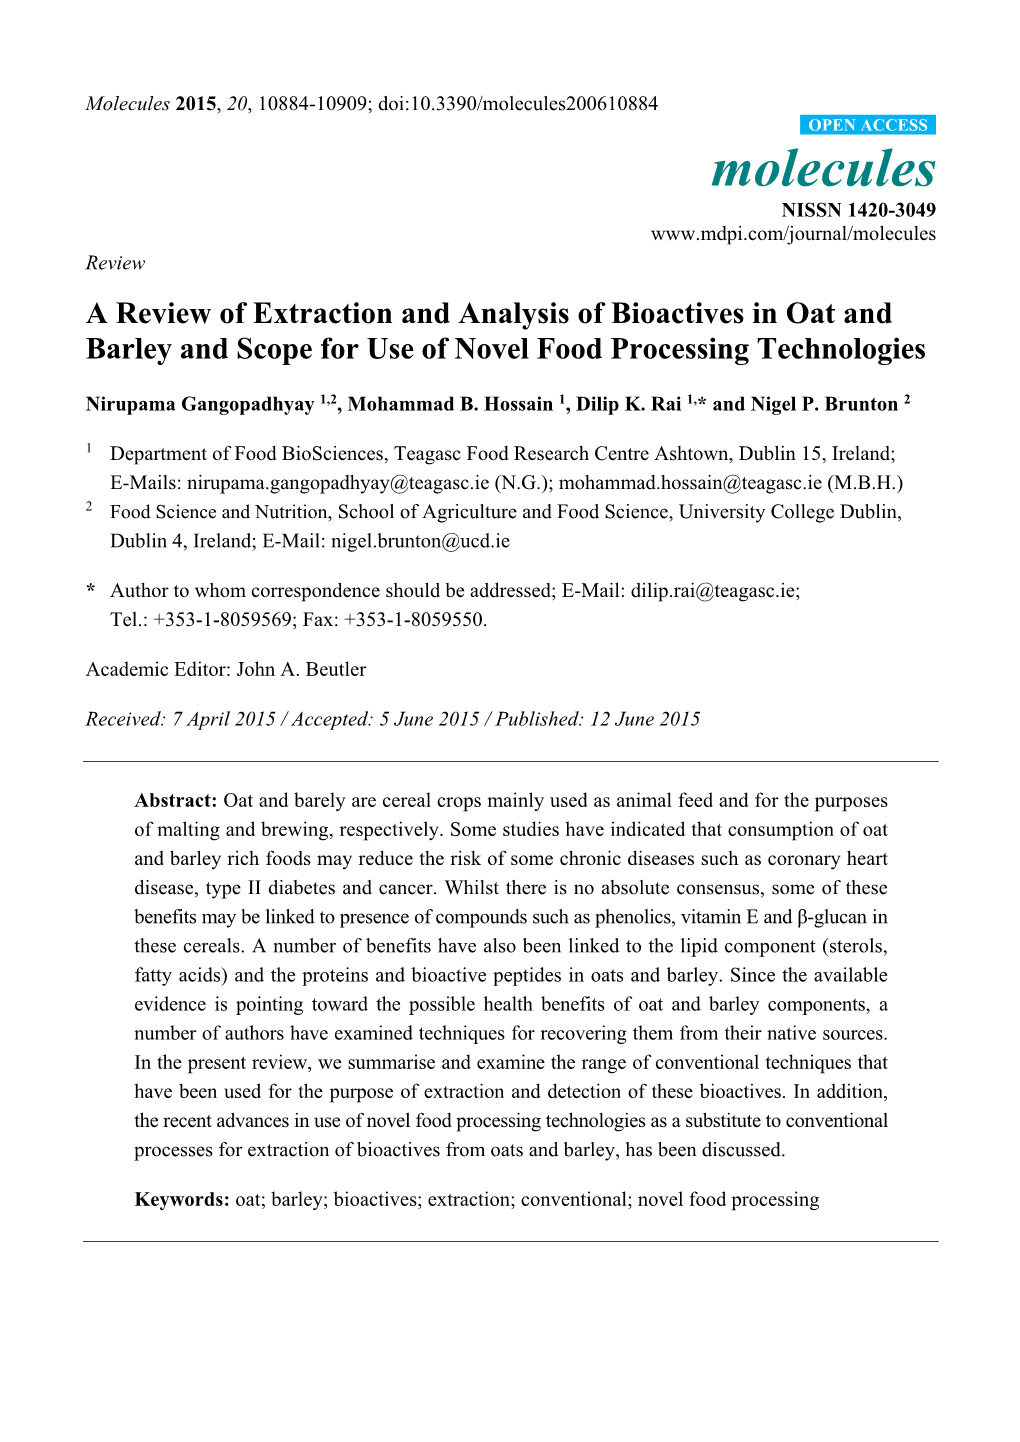 A Review of Extraction and Analysis of Bioactives in Oat and Barley and Scope for Use of Novel Food Processing Technologies